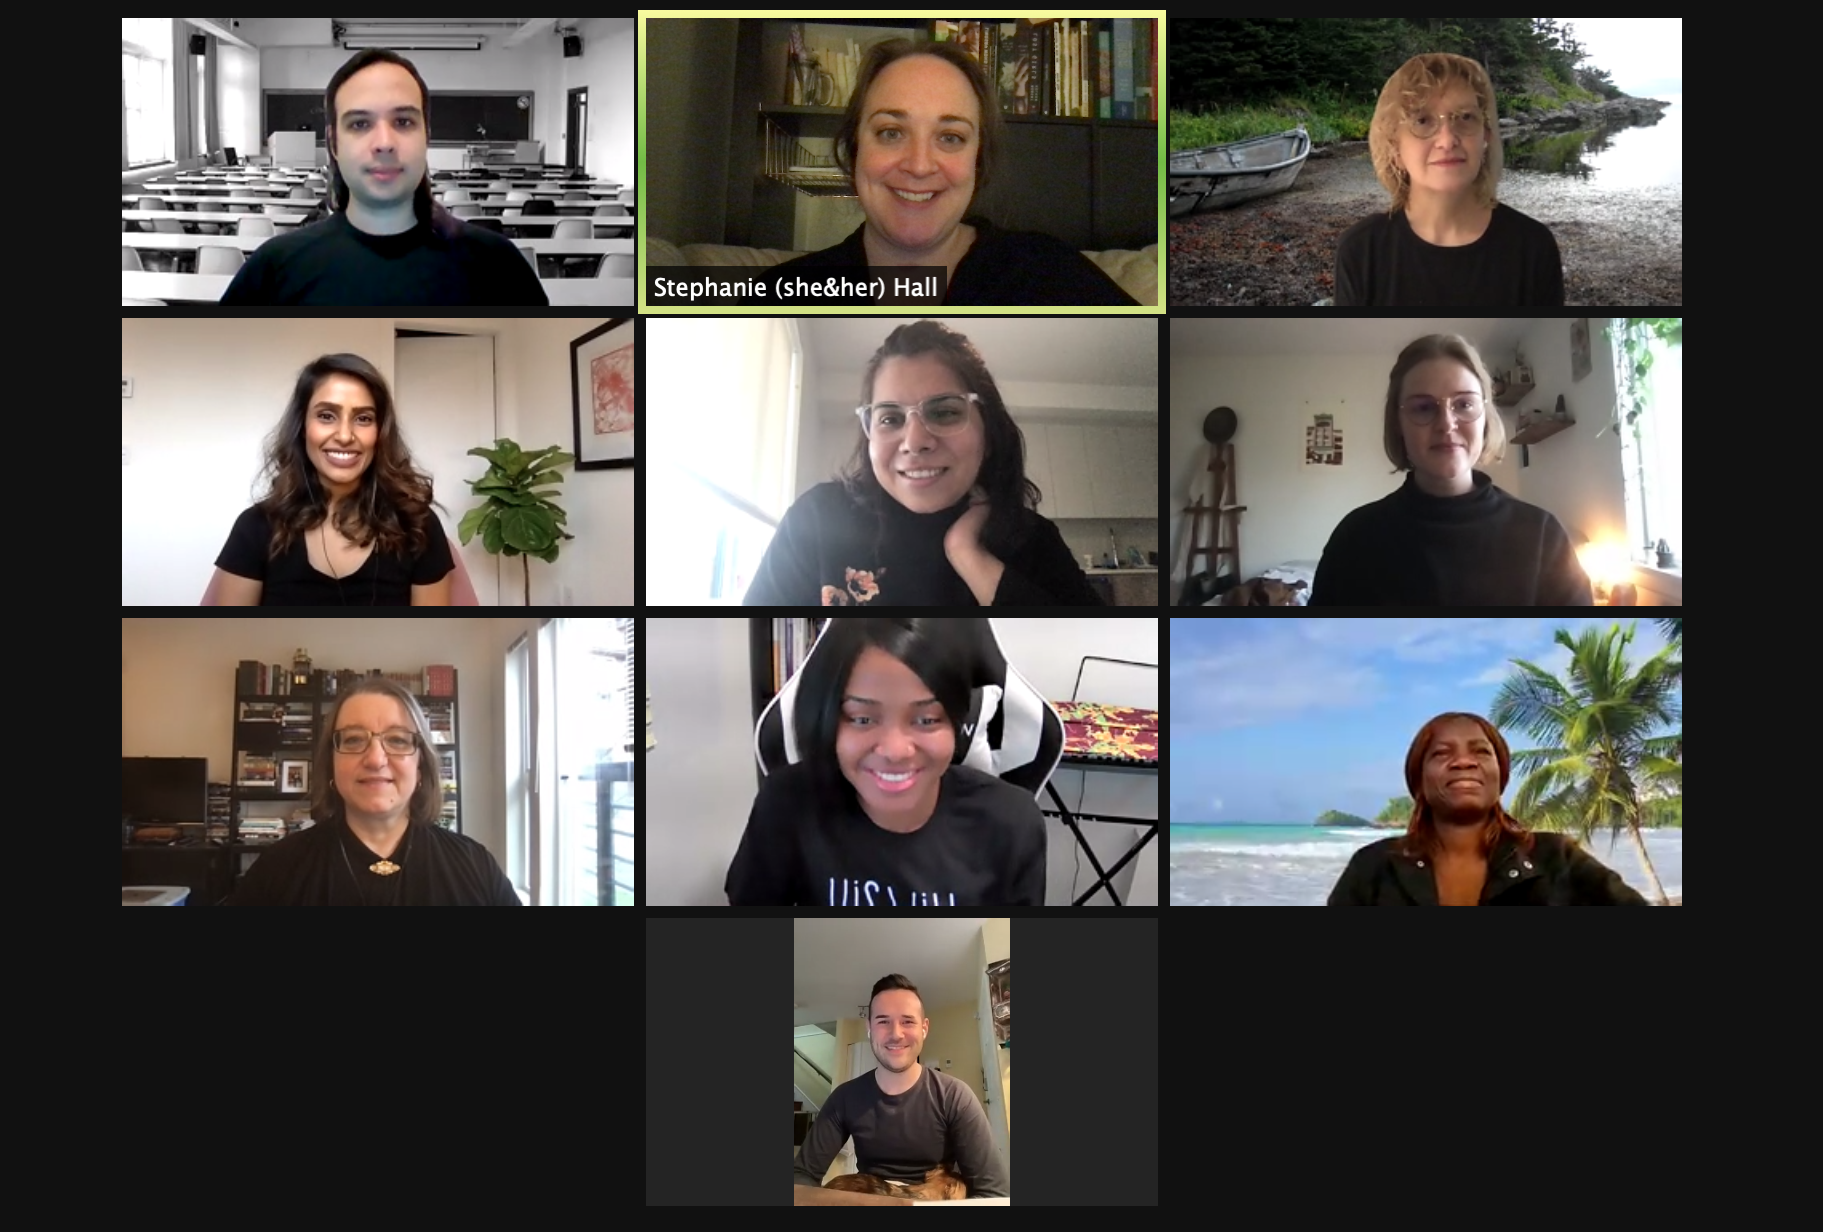 Screenshot of a Zoom meeting with 10 SARAVYC staff members all smiling and wearing black shirts.